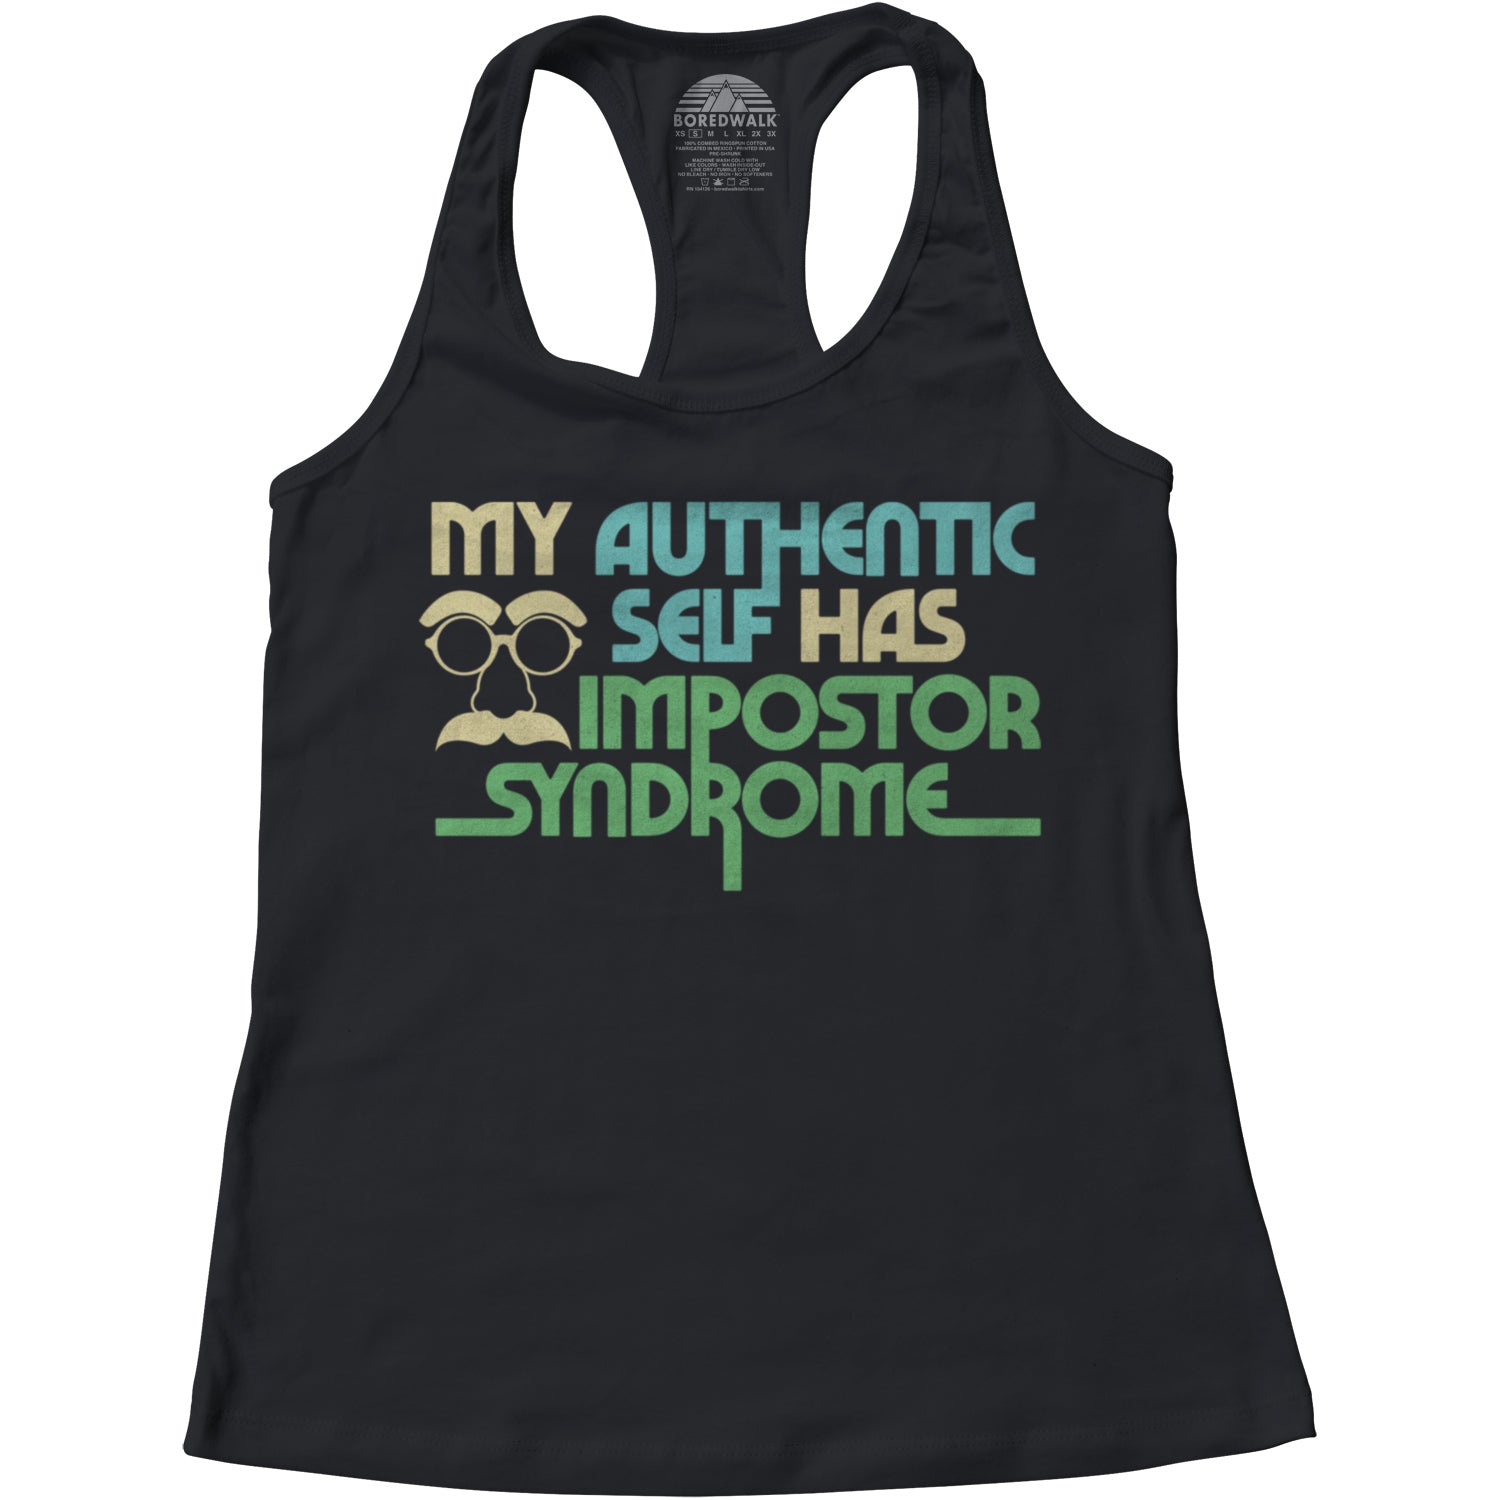 Women's My Authentic Self Has Impostor Syndrome Racerback Tank Top